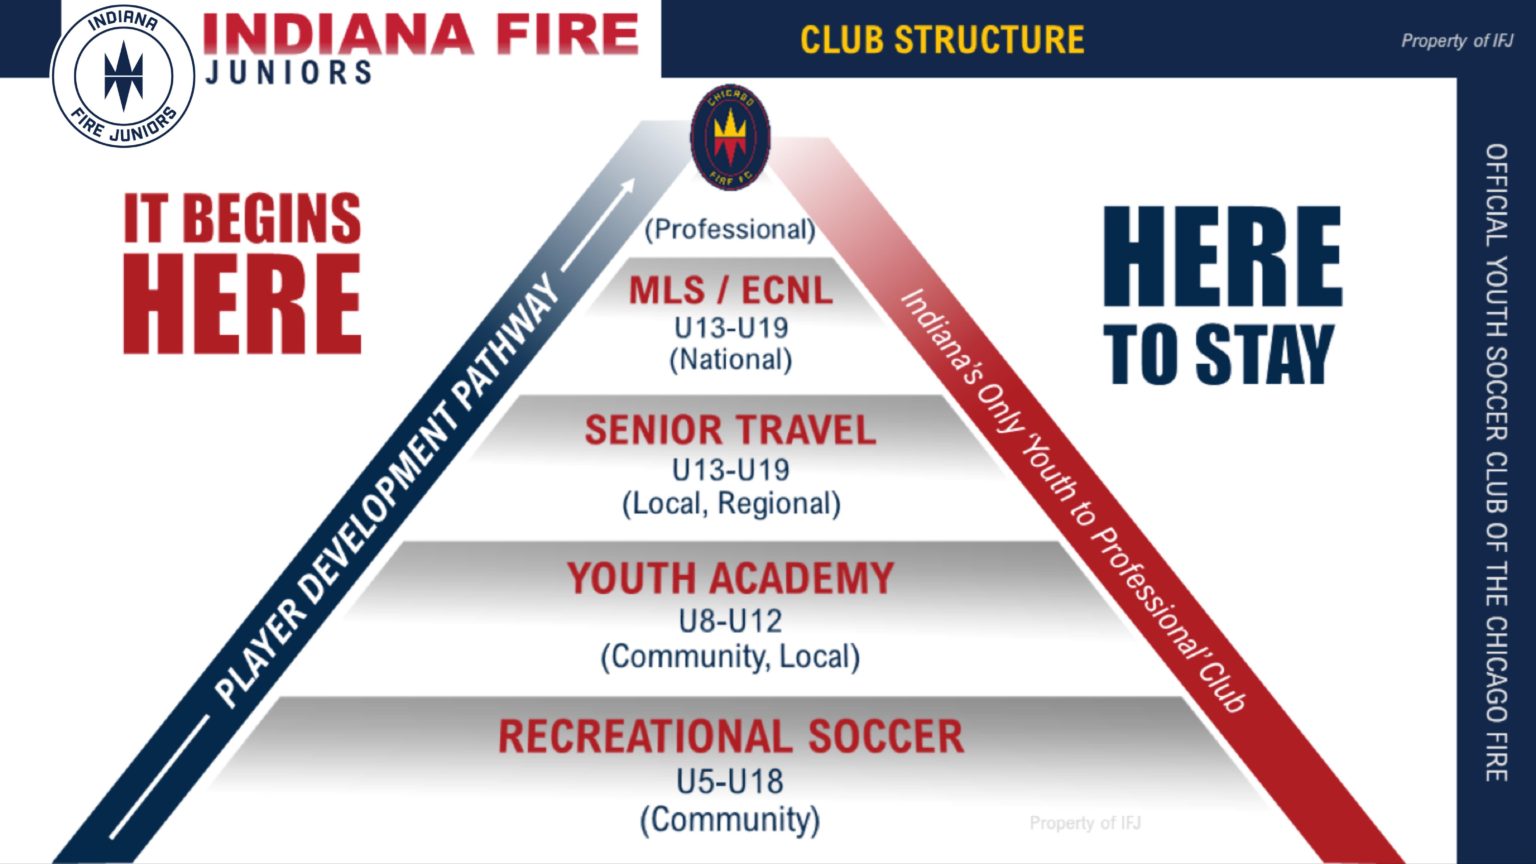 Chicago Fire Tryouts & Club Guide History, Stadium, Players, and More!